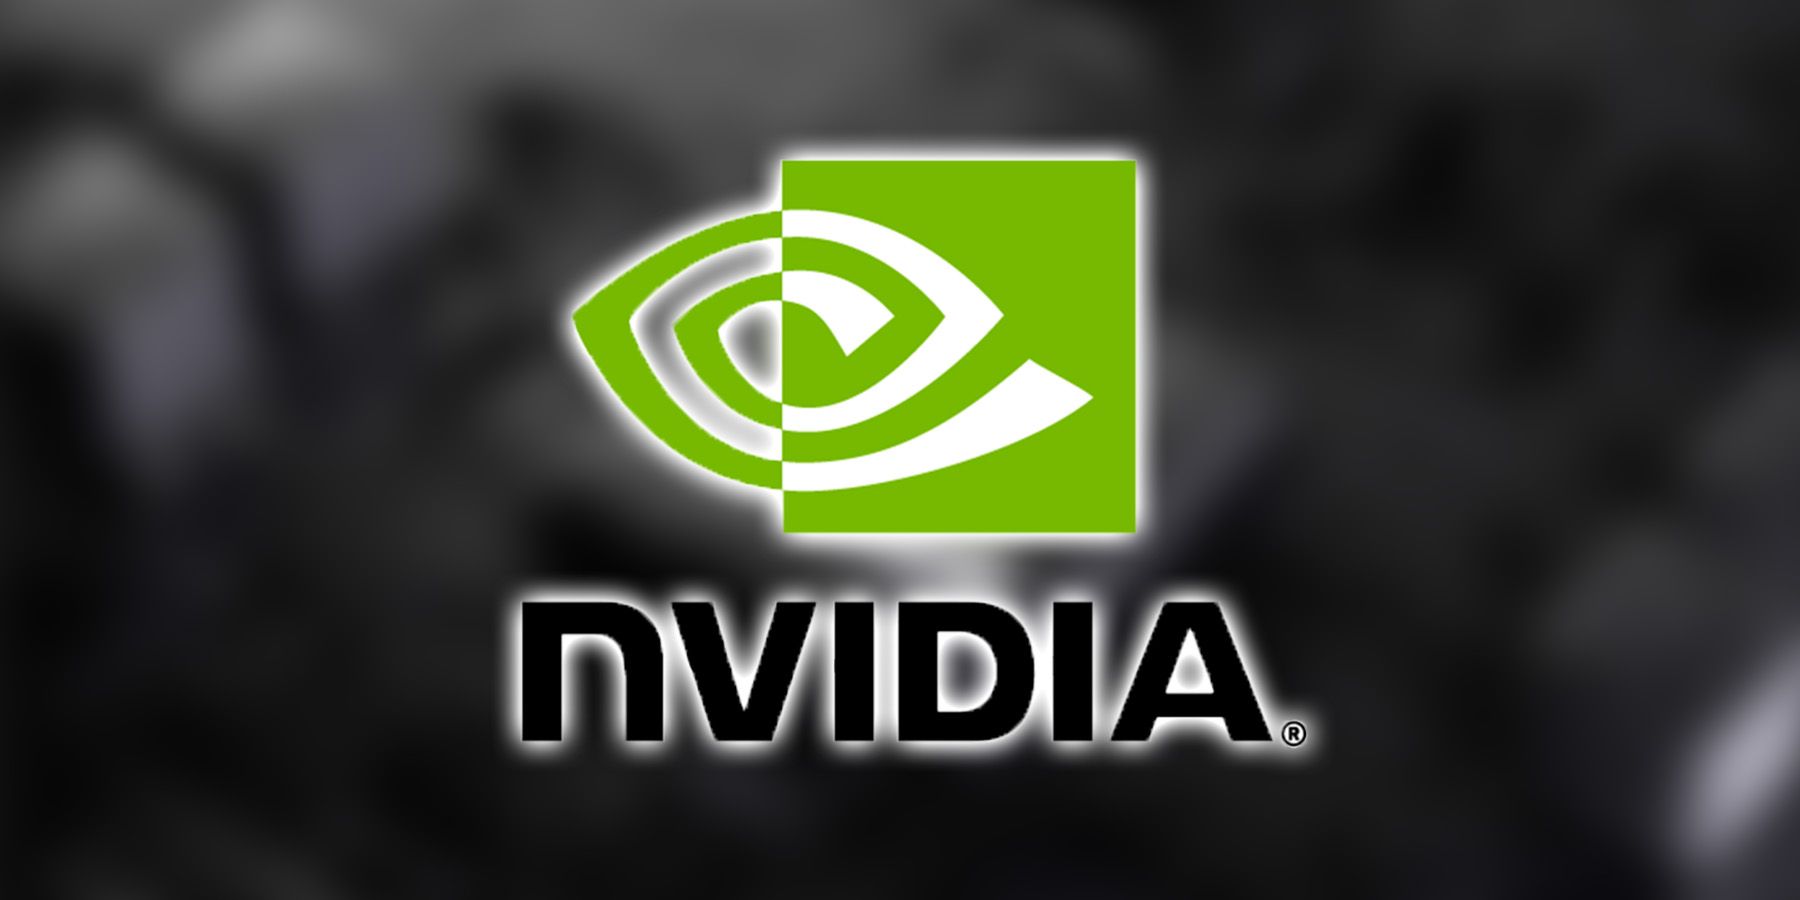 Nvidia logo in front of blurred background